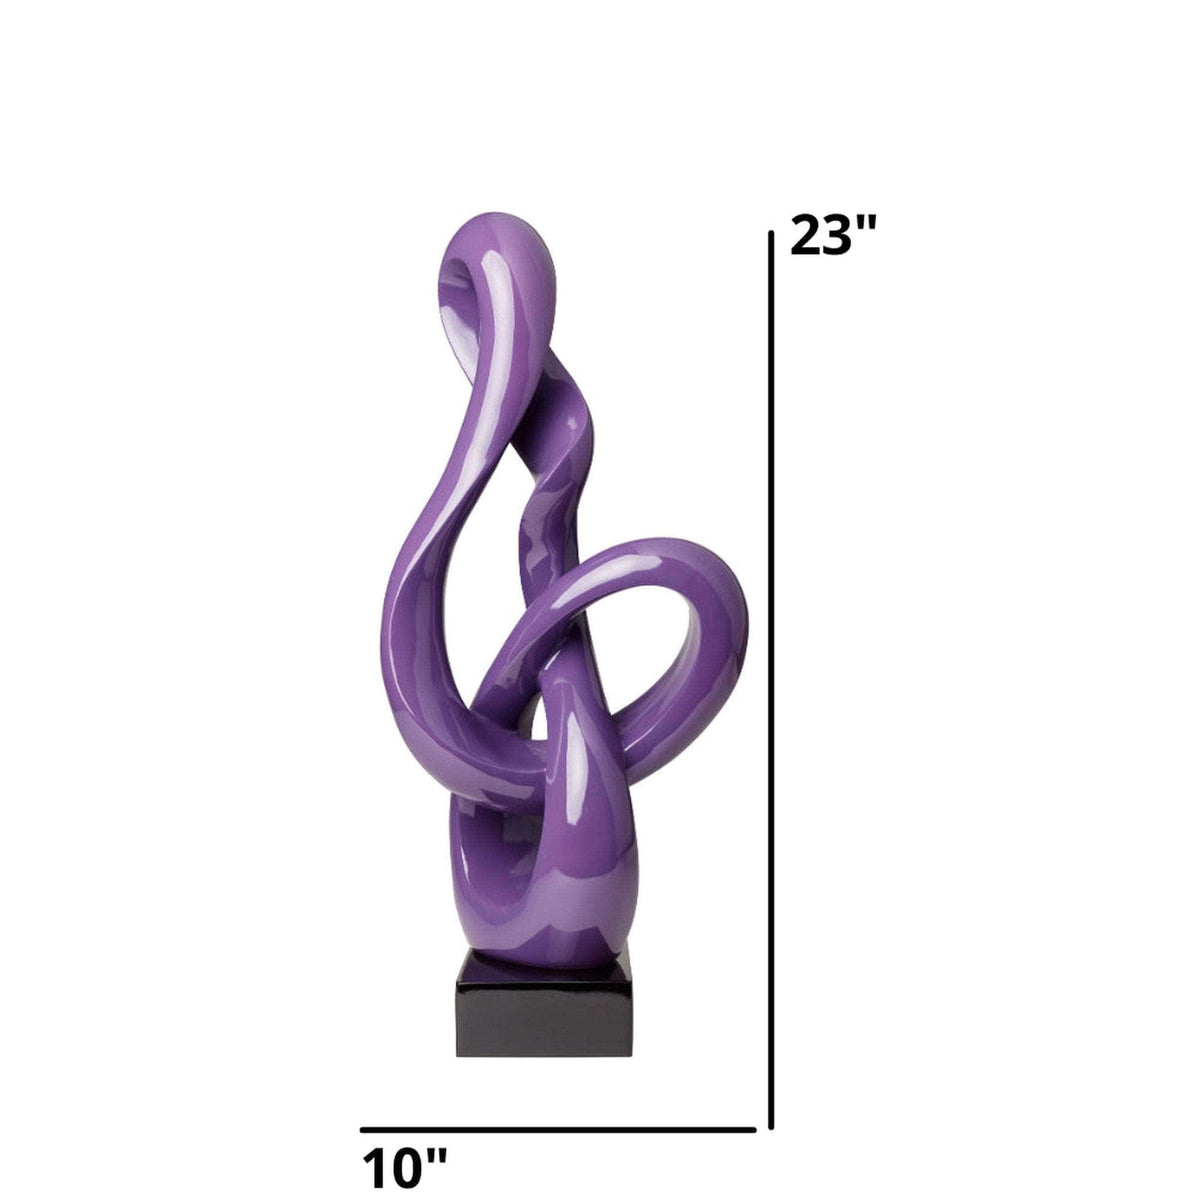 Antilia Abstract Sculpture in Violet / Small / Dimensions